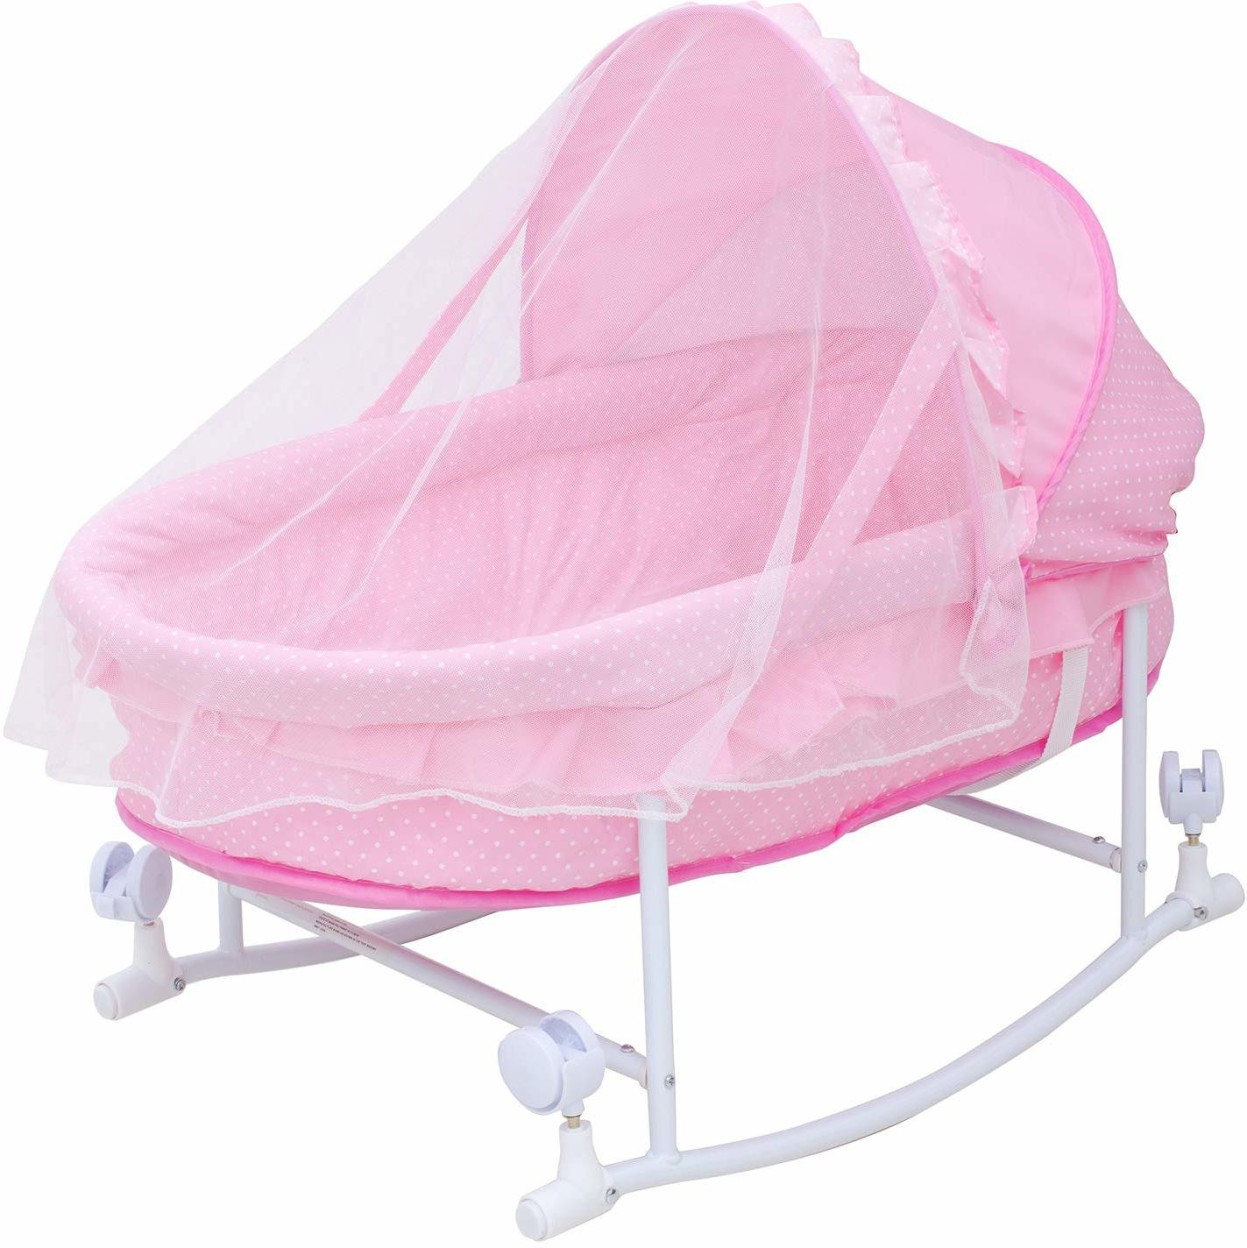 jhula baby bed